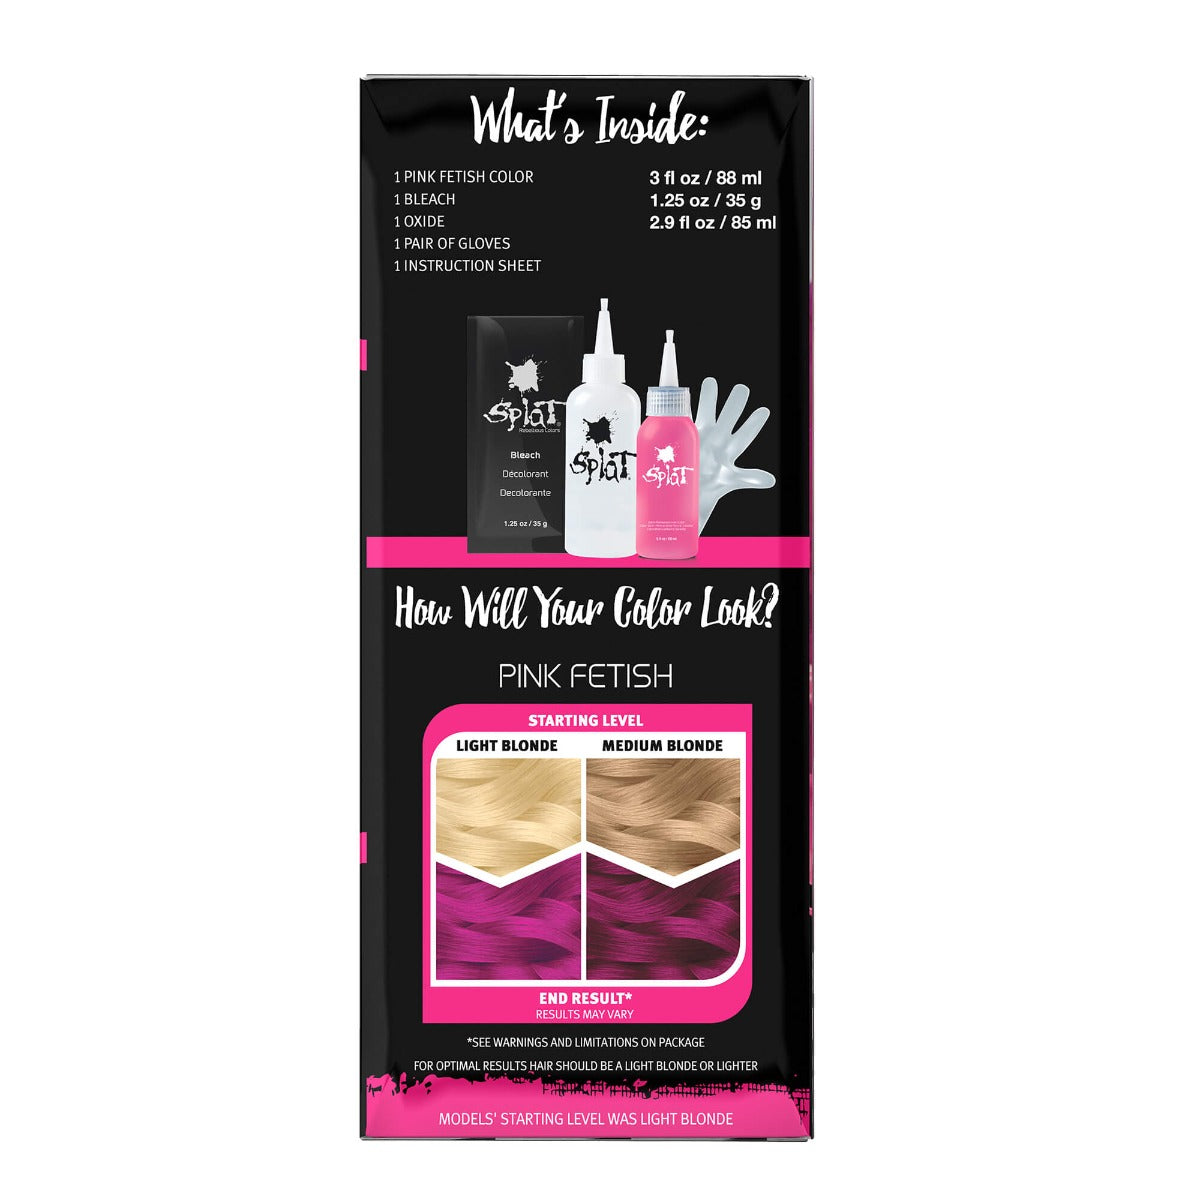 Pink Fetish: Original Pink Semi-Permanent Hair Dye Complete Kit with Bleach